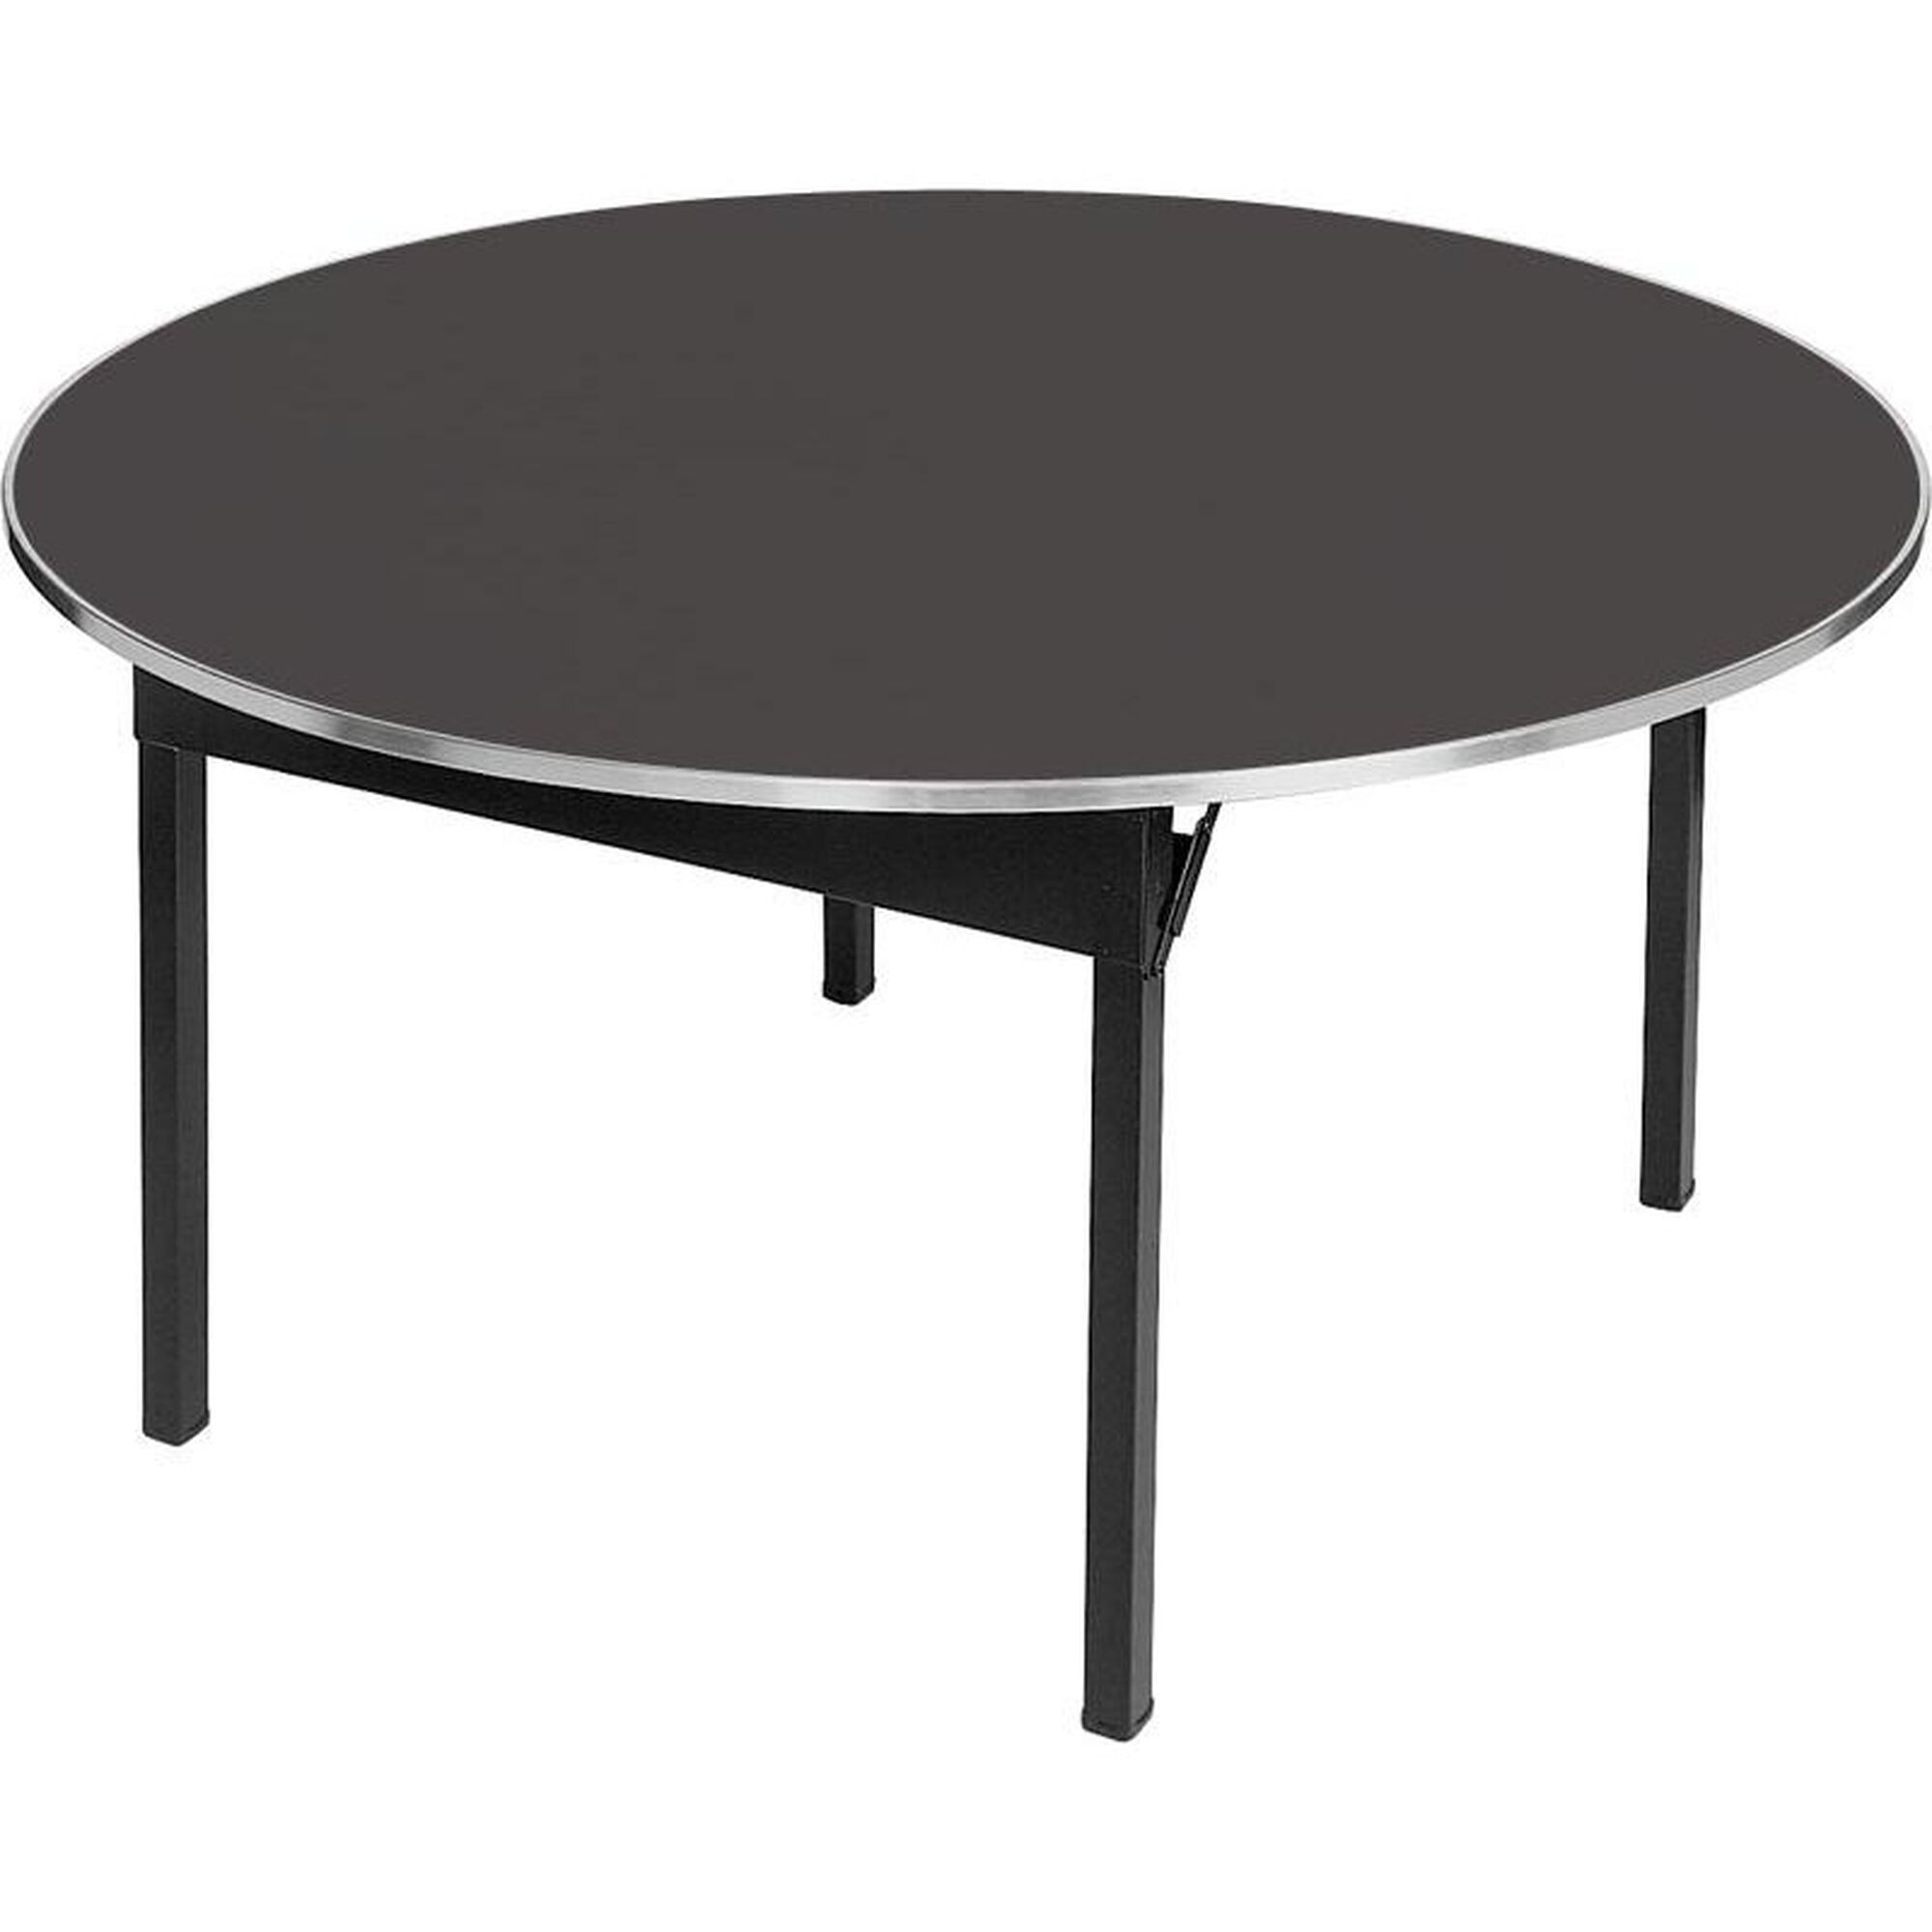 Laminate round banquet table dlorig72rd